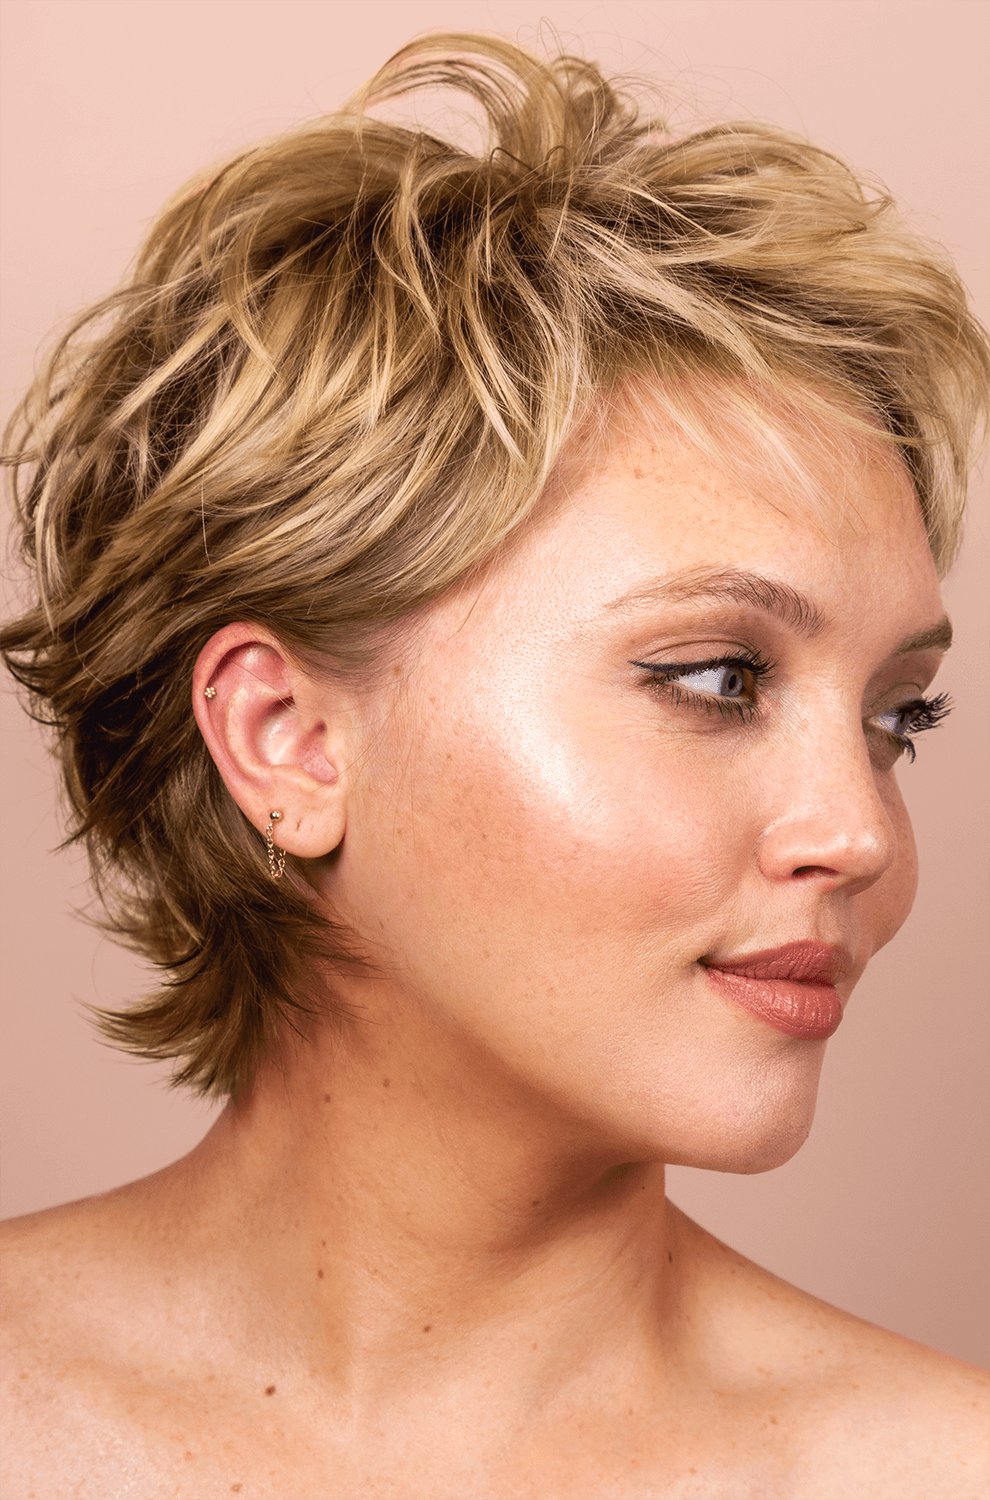 woman with a pixie haircut with textured, volumized layers